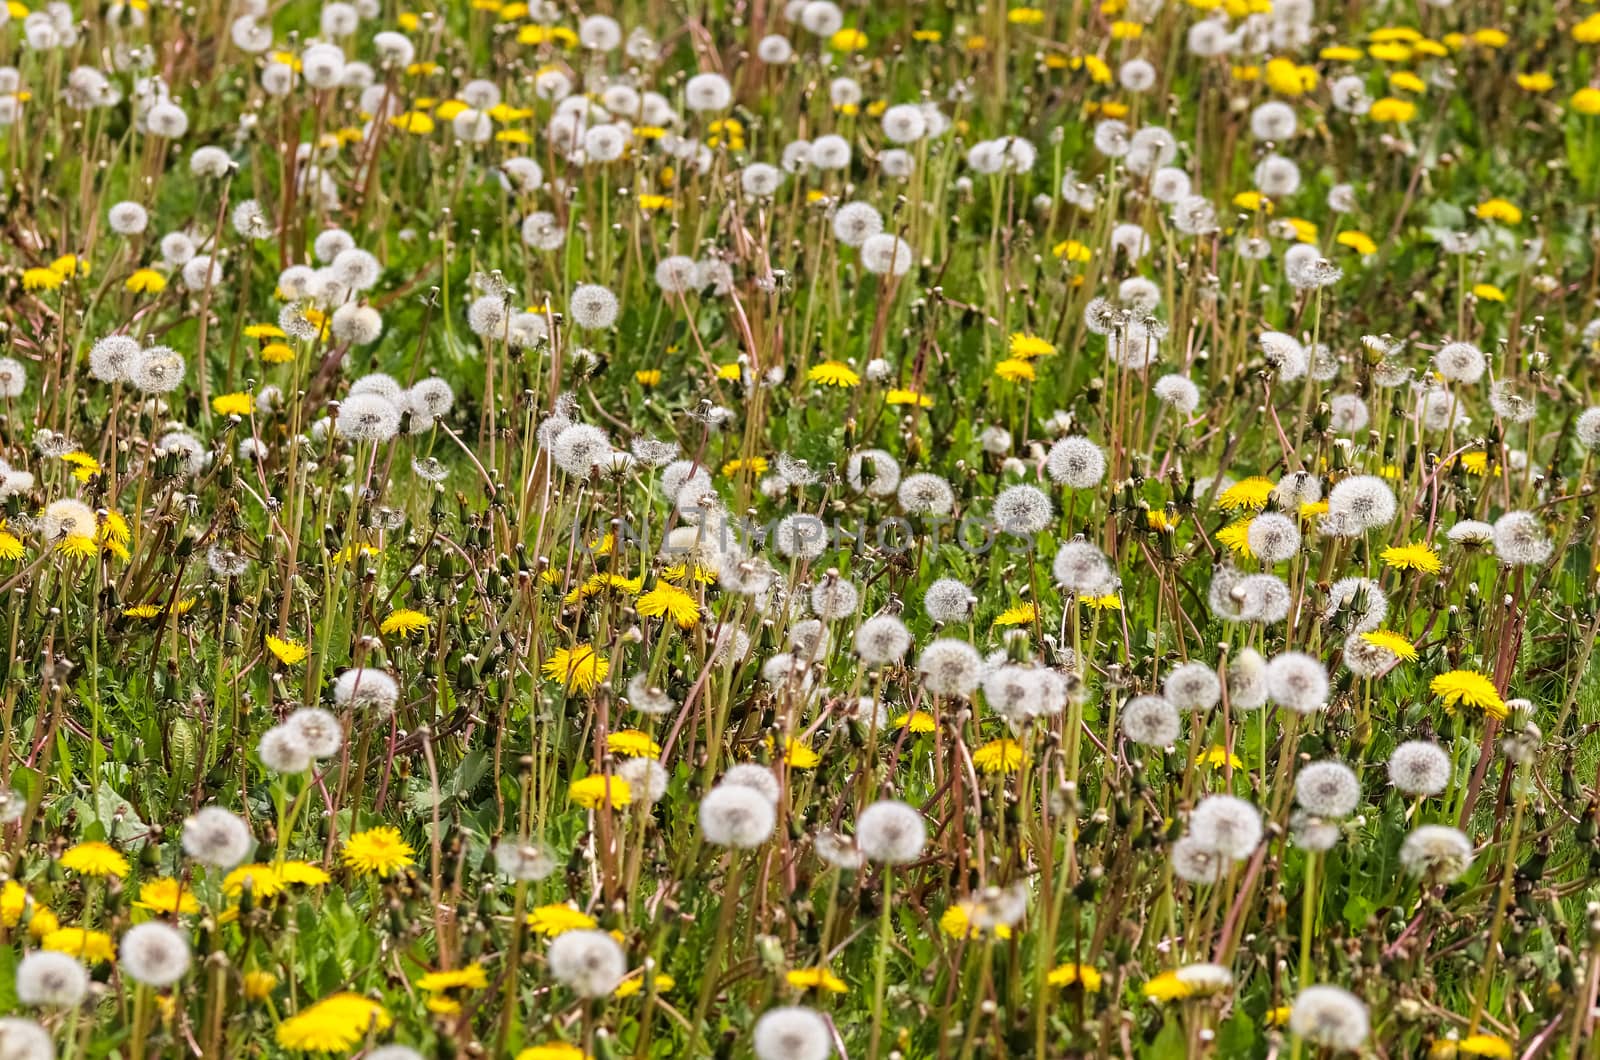 Close up view at a blowball flower found on a green meadow full of dandelions.